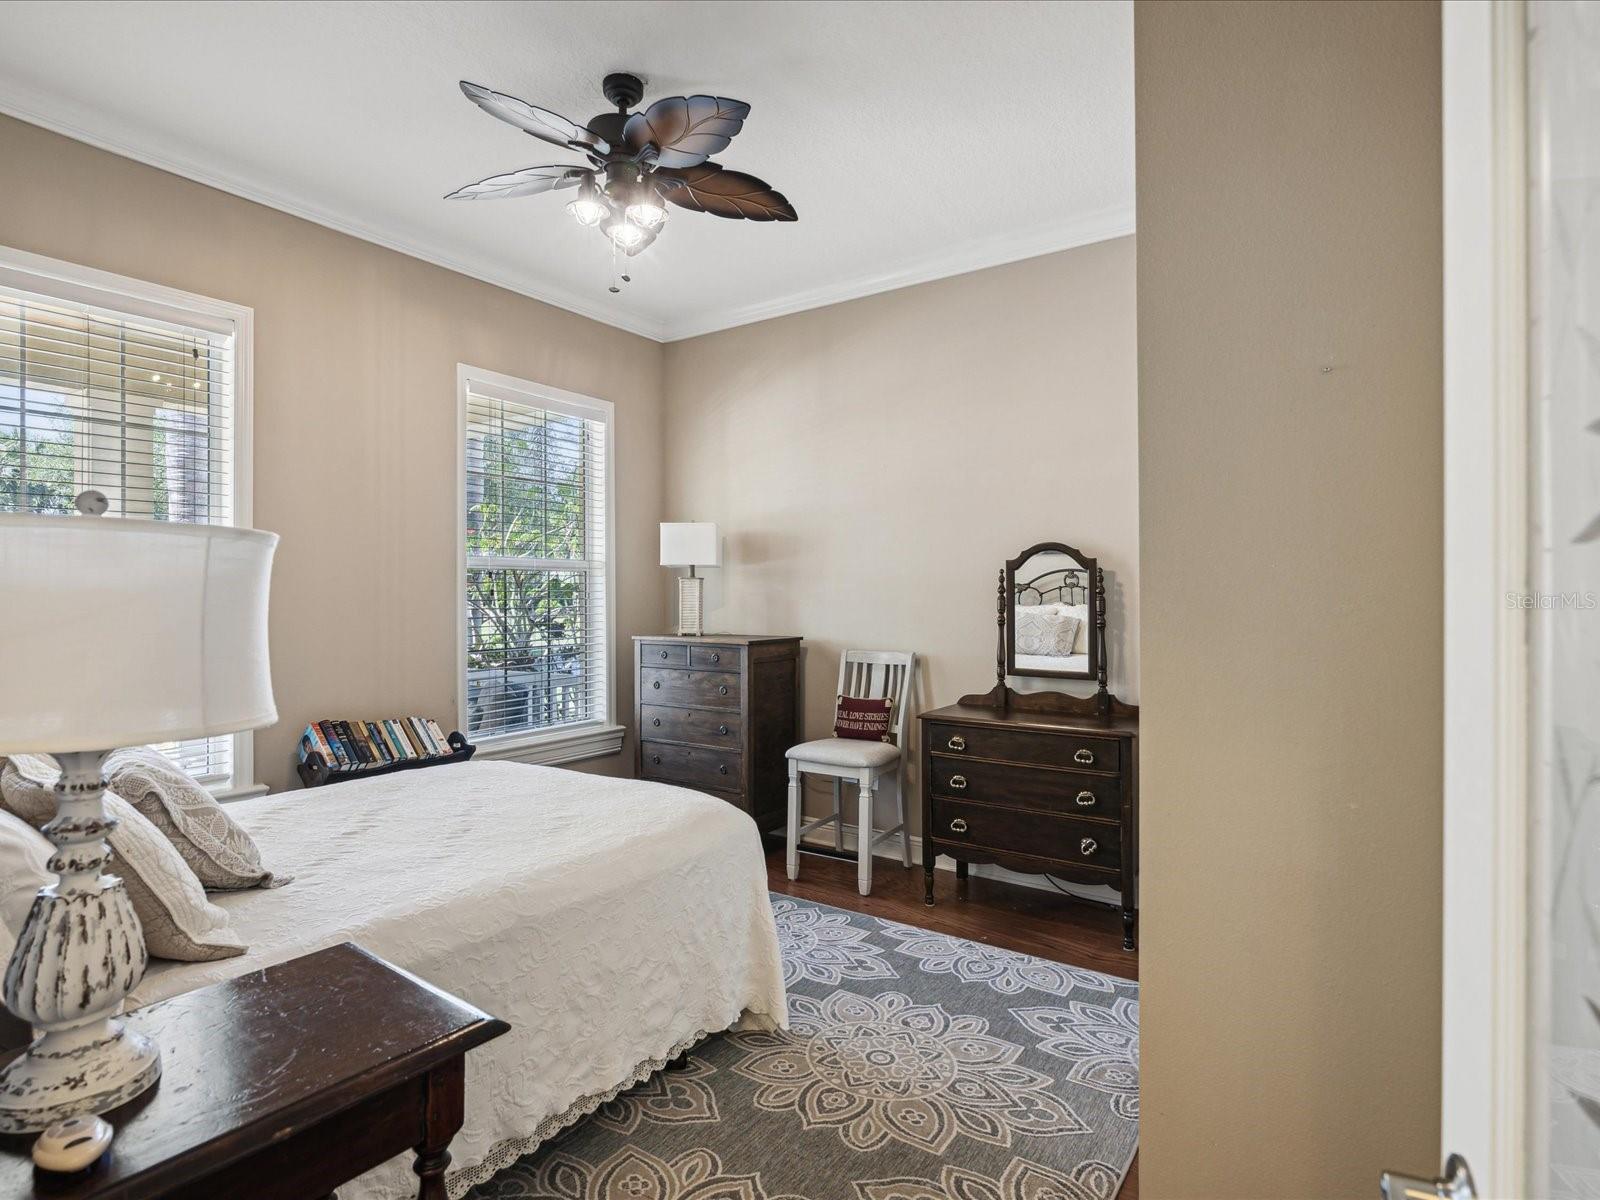 The fourth bedroom to the left of the front door features glass paneled French doors, ceiling fan with light, and a large closet.